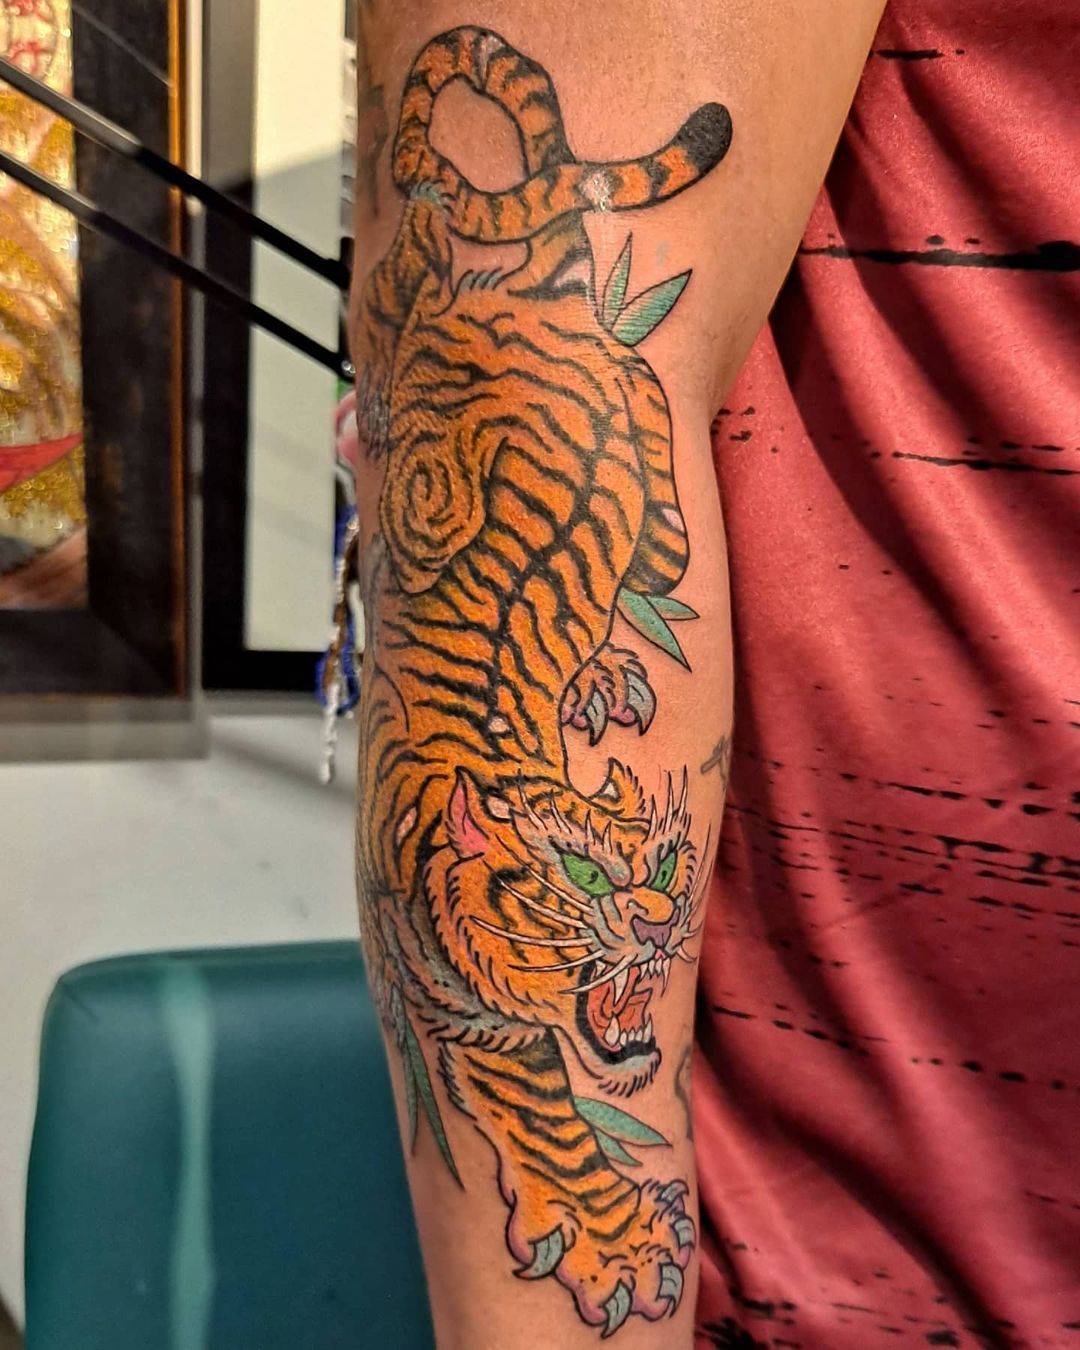 85 Awesome Tiger Tattoo Designs | Art and Design | Tiger tattoo design,  Japanese tiger tattoo, Tiger tattoo